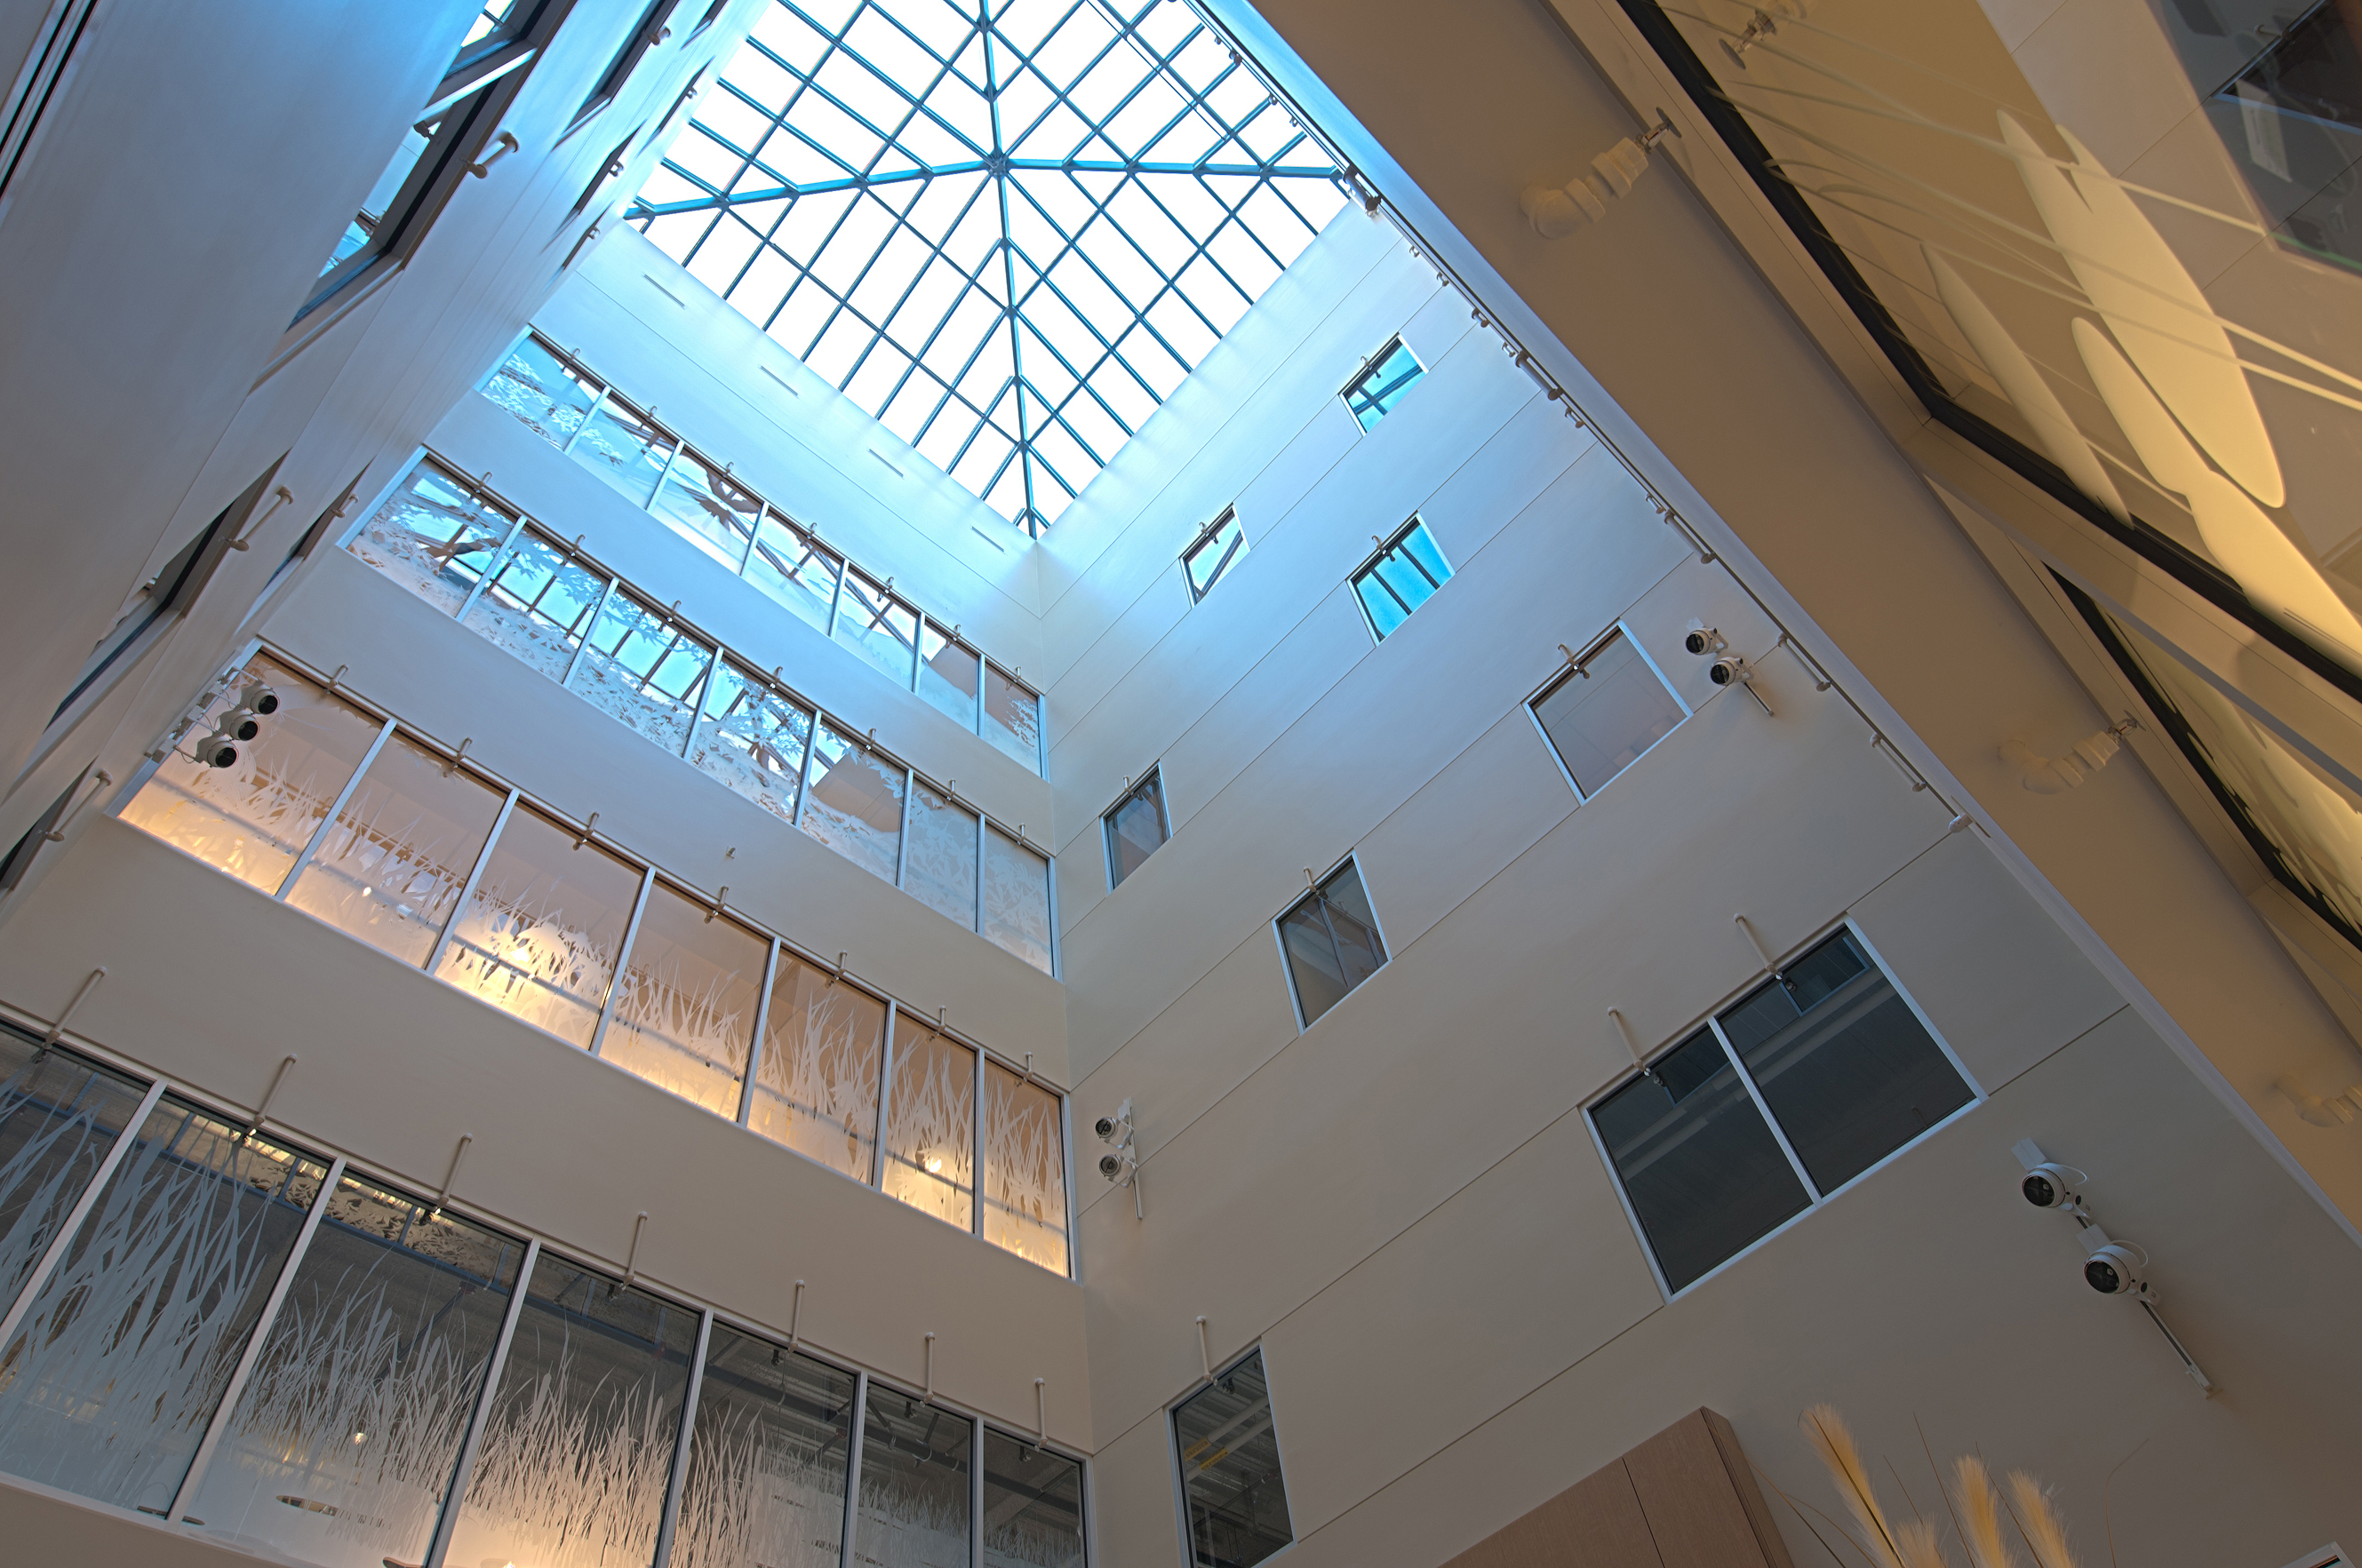 As part of the Baystate Medical Center, Suffolk Construction adhered to the sust